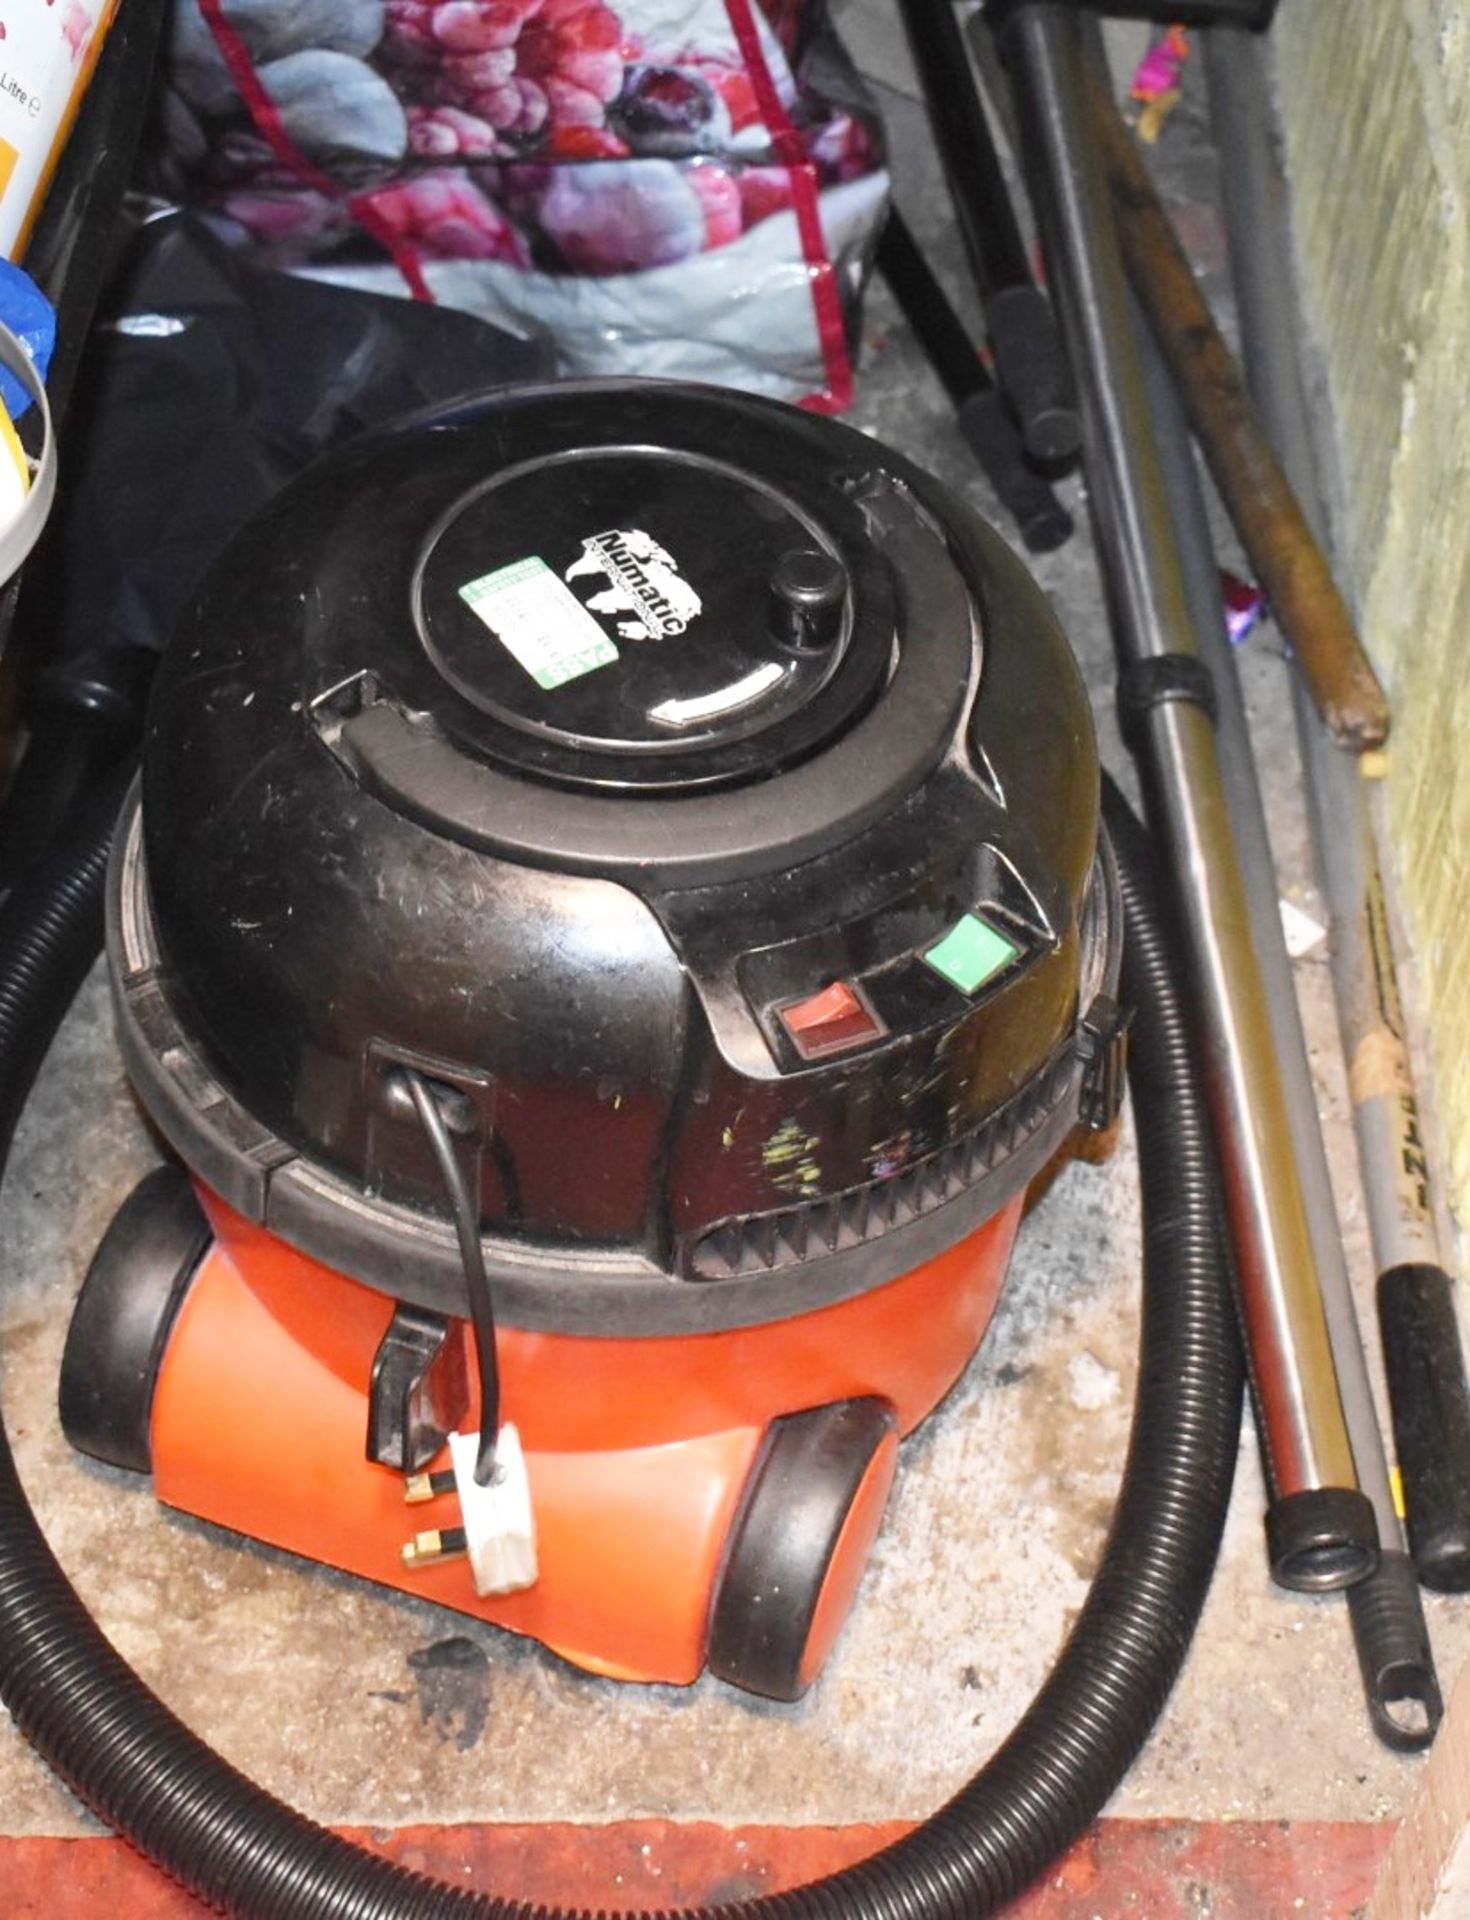 1 x Numatic Henry Hoover With Accessories - Ref 363A - CL520 - Location: London W10 More pictures, - Image 2 of 2